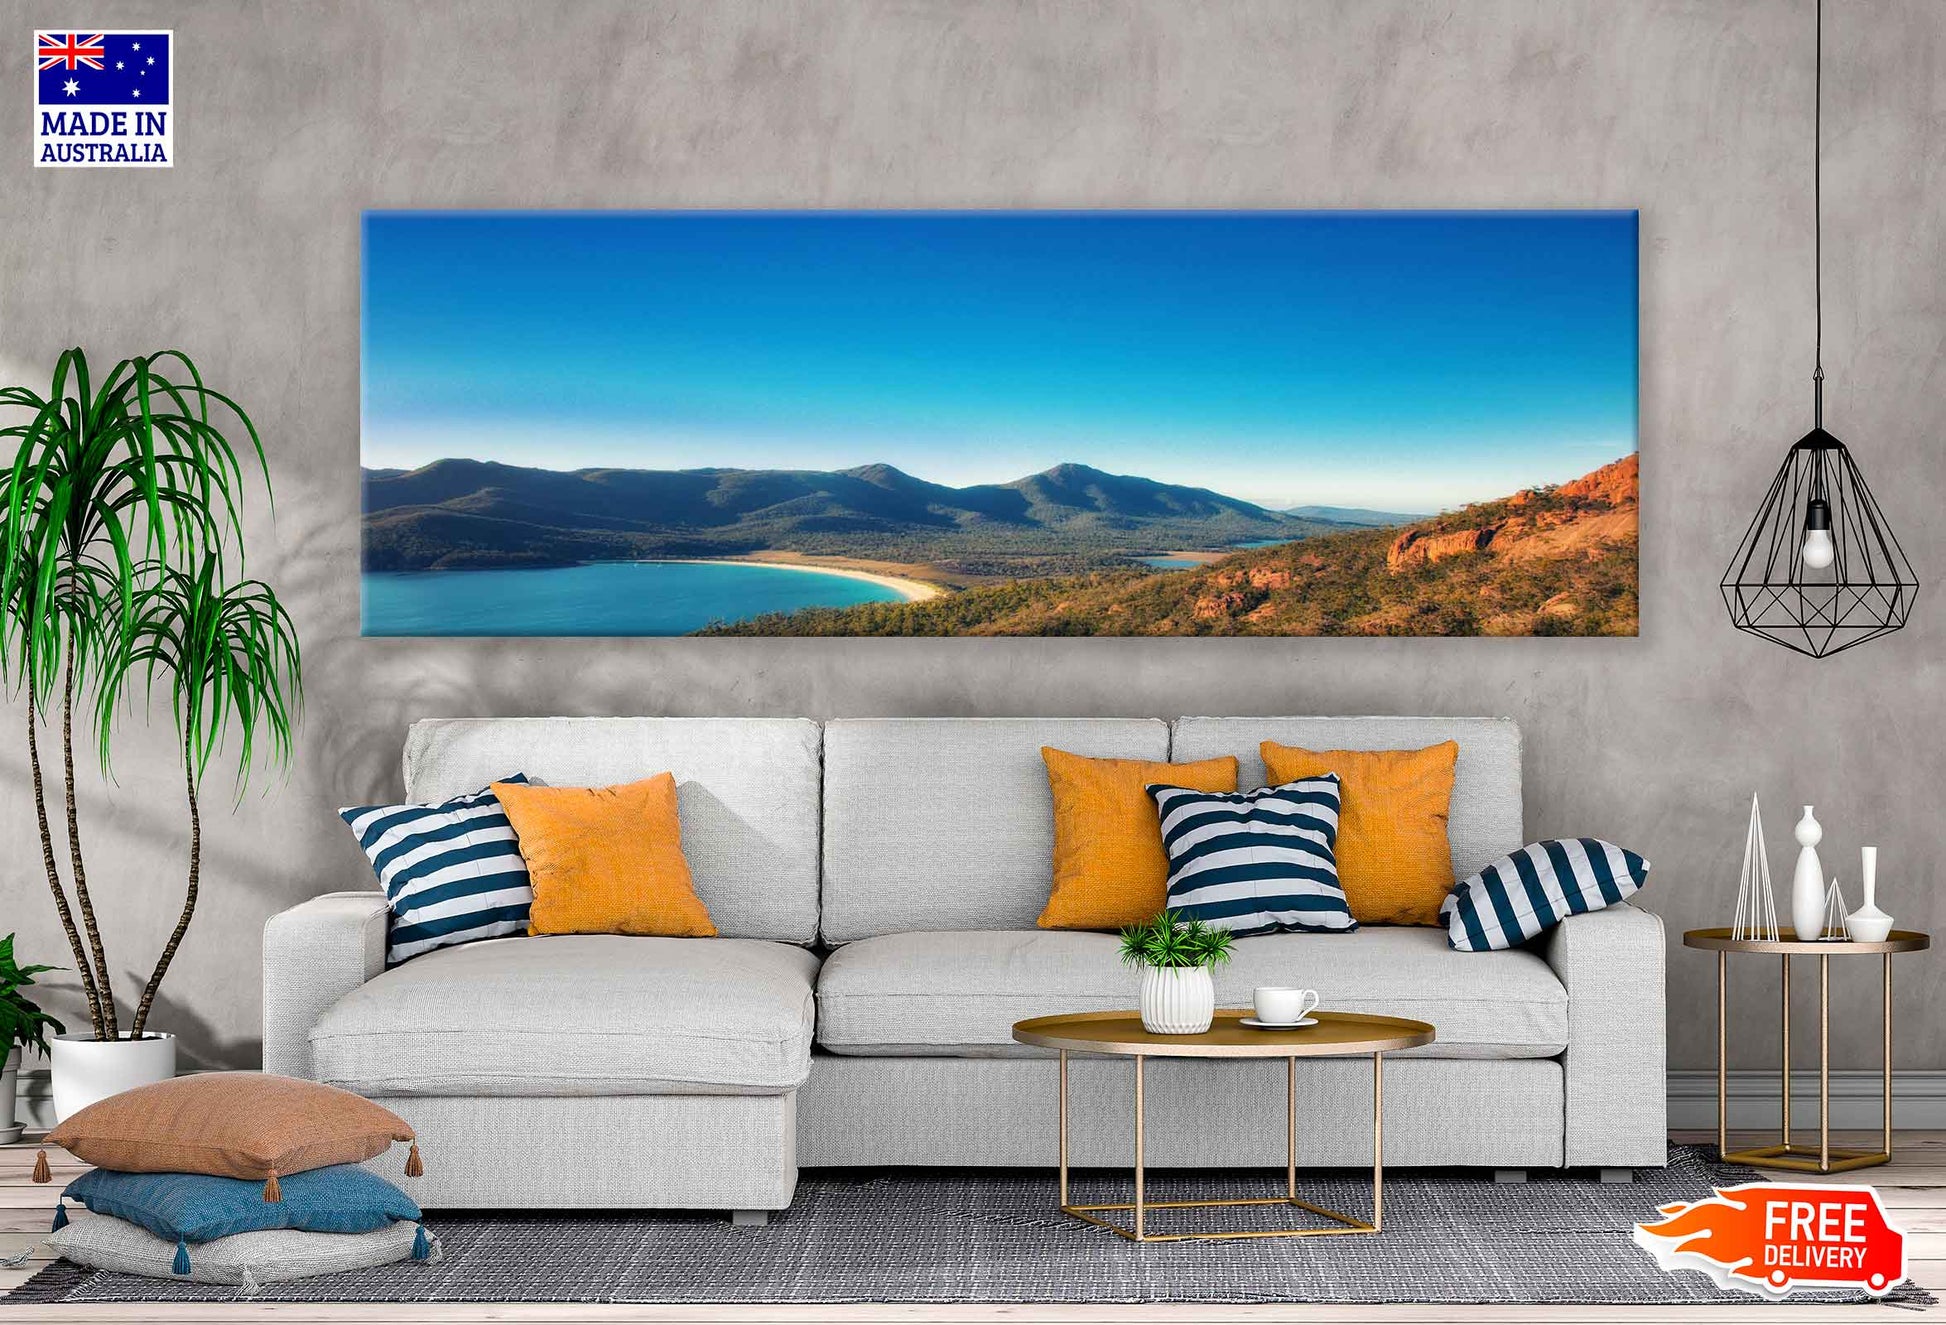 Panoramic Canvas Wineglass Bay Ocean & Mountains High Quality 100% Australian Made Wall Canvas Print Ready to Hang